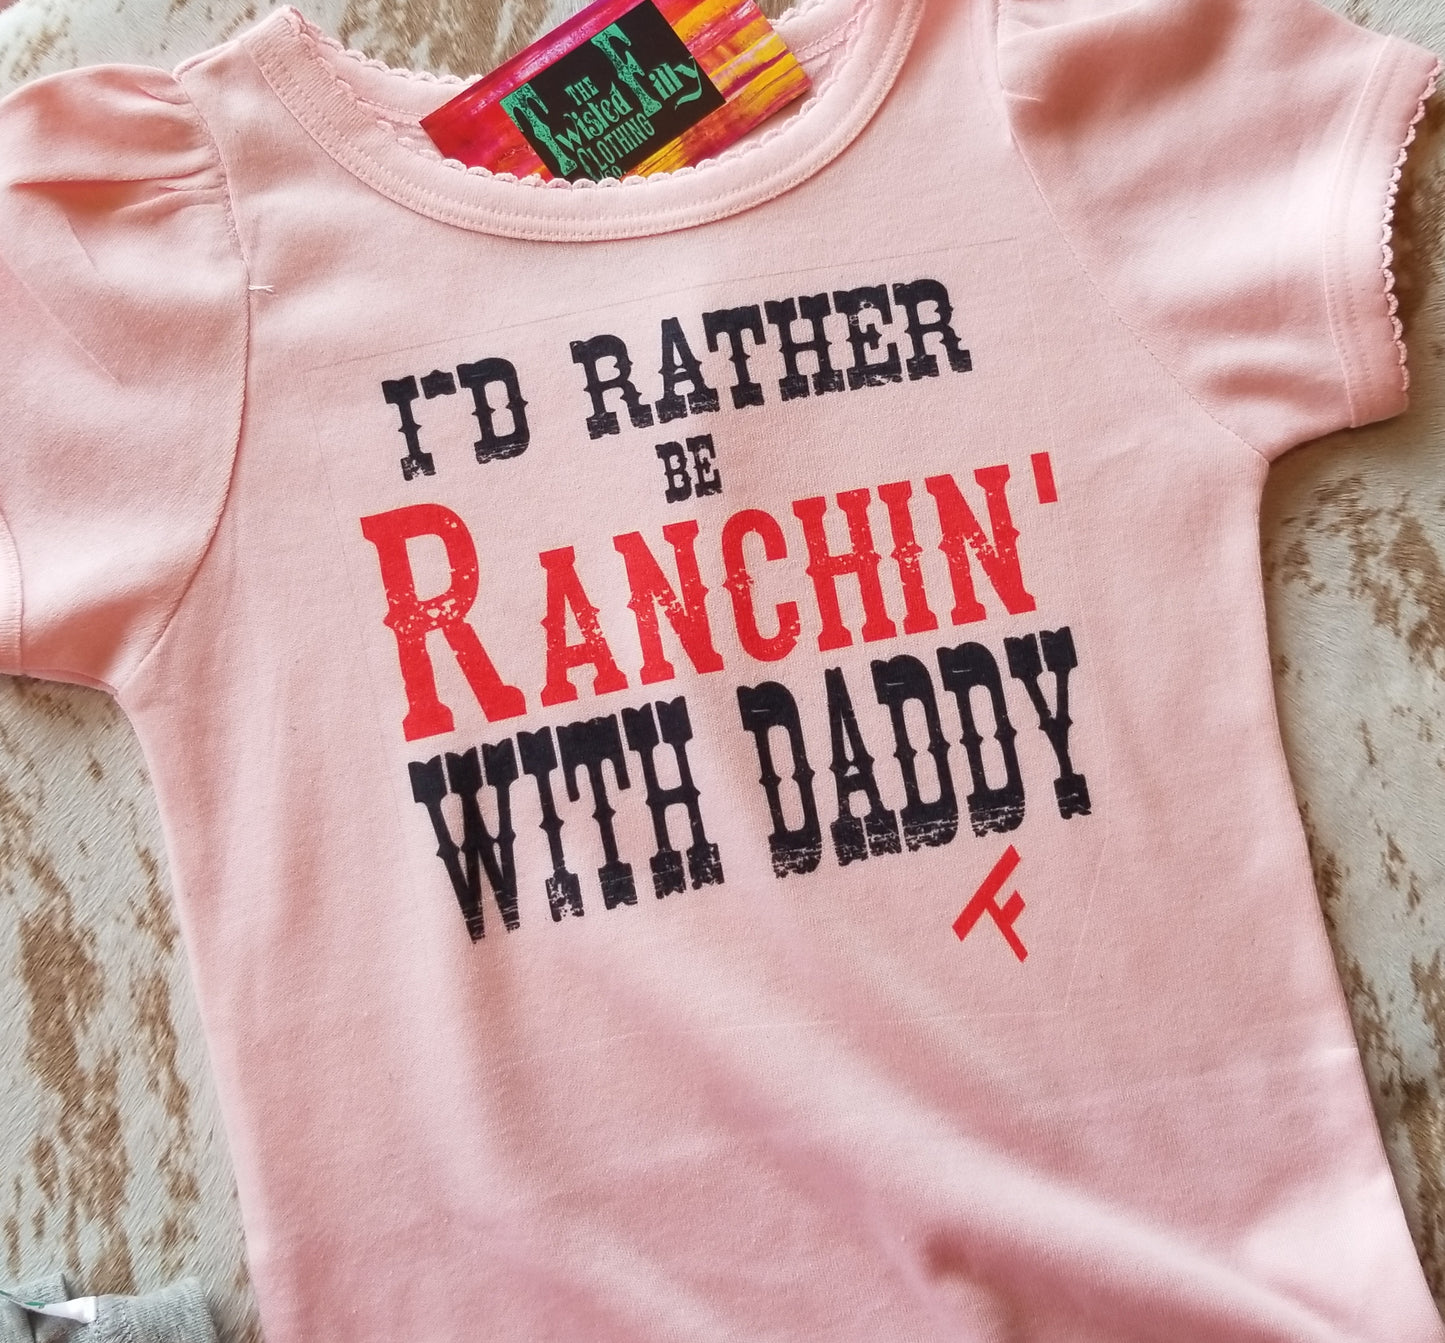 I'd Rather Be Ranchin' With Daddy - S/S Toddler Girls Tee - Dusty Rose